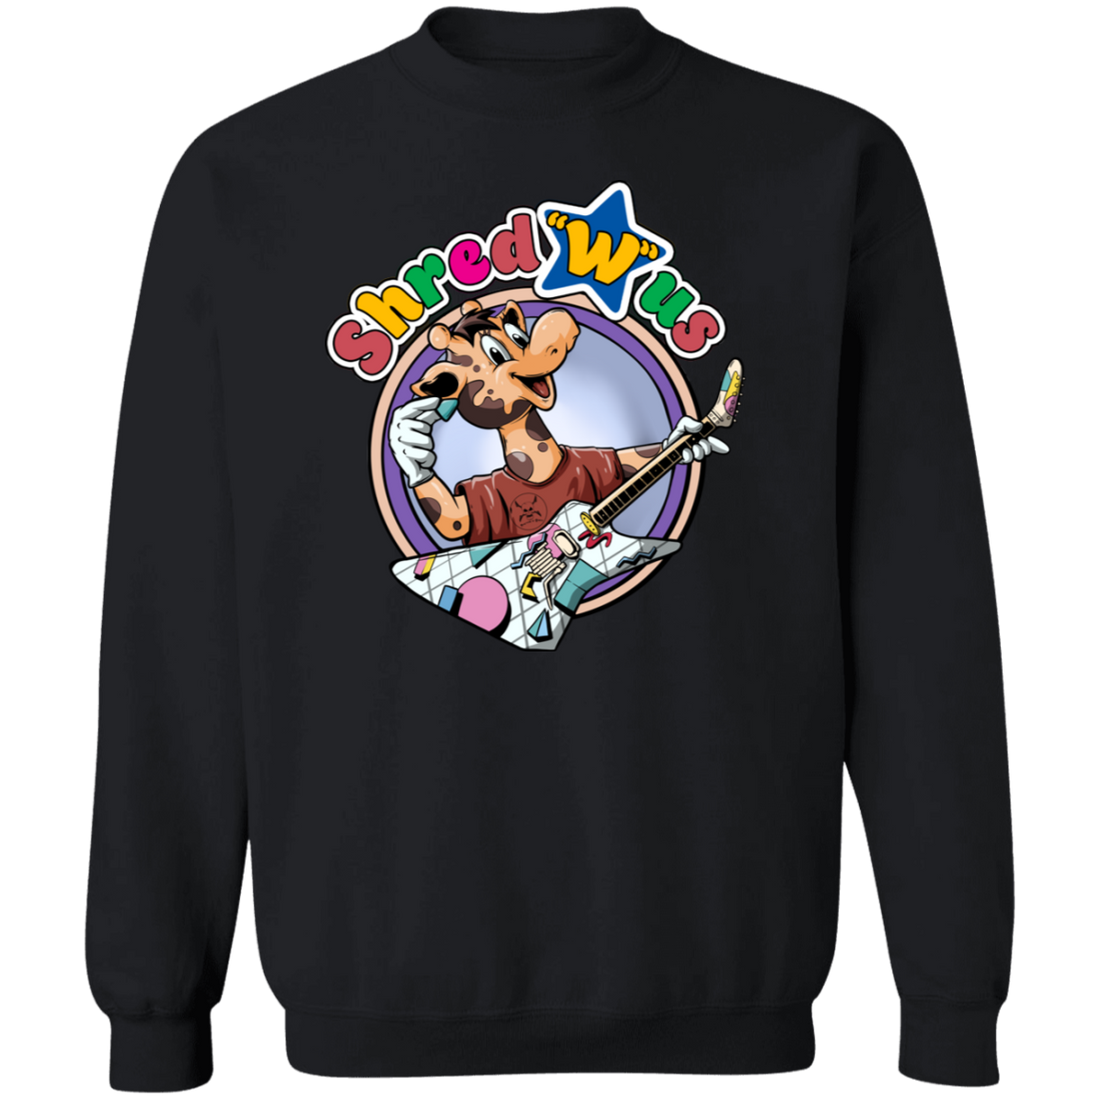 Shred With Us Pullover Sweatshirt